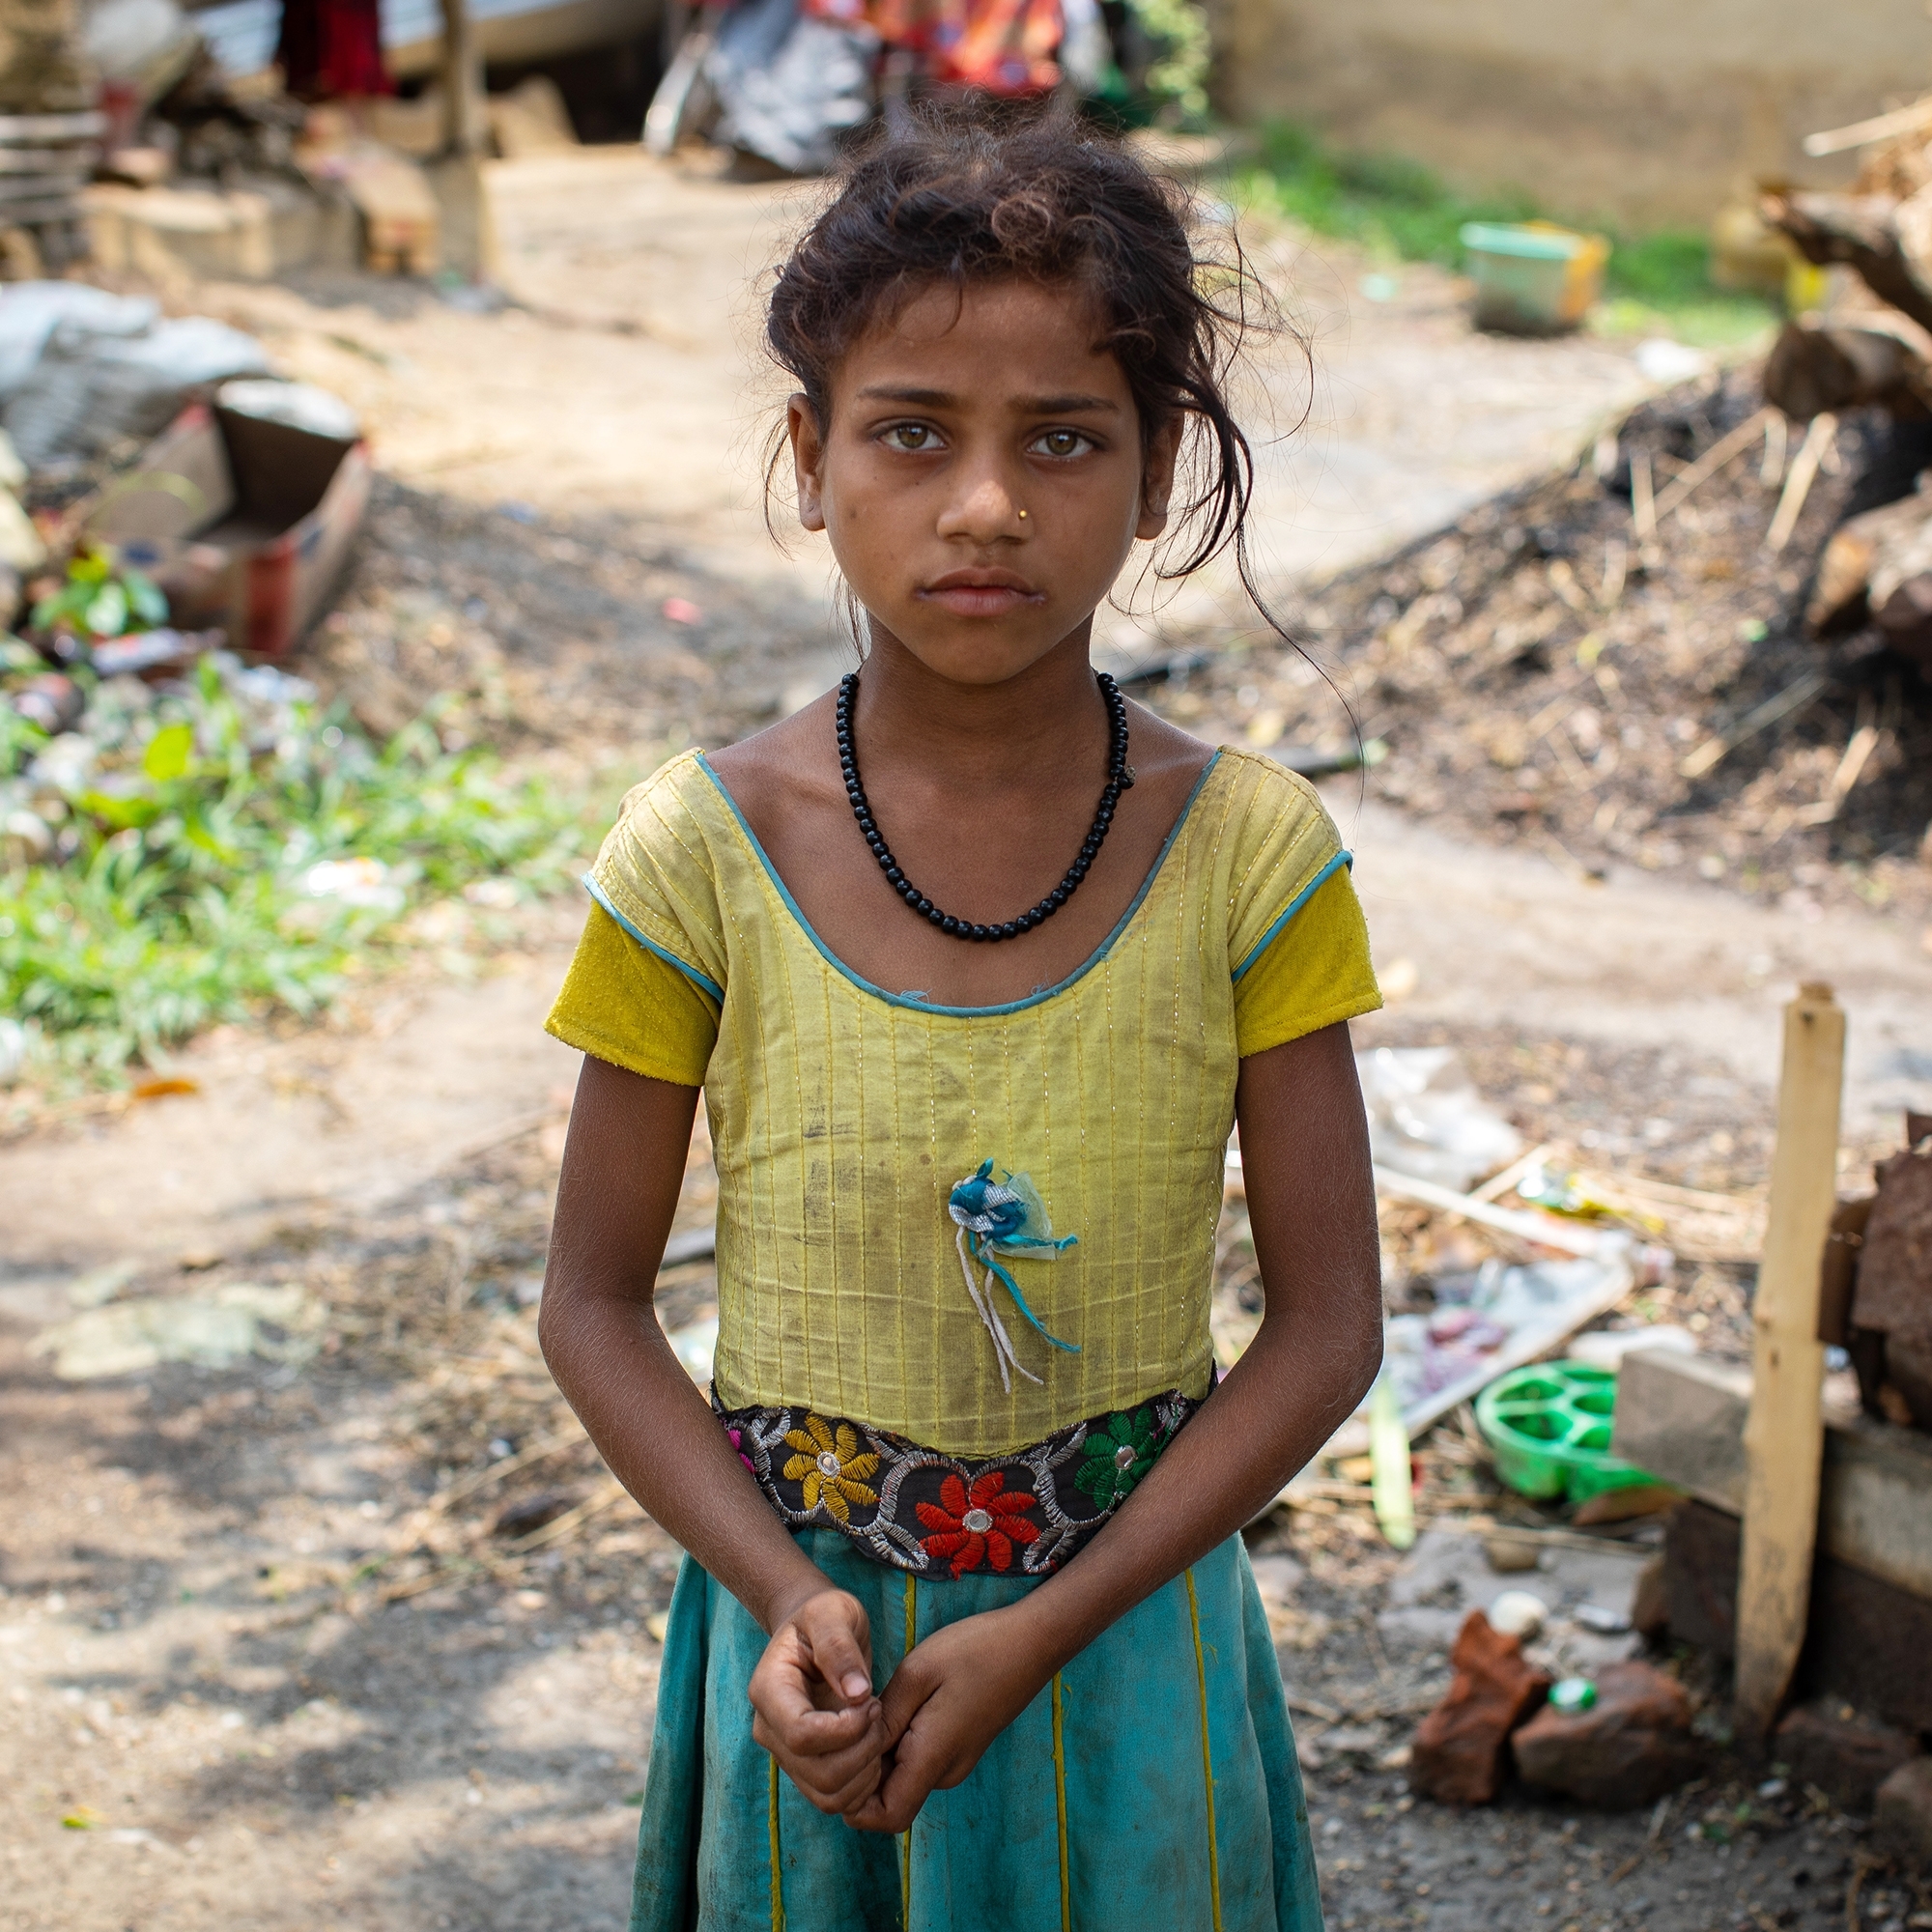 In Nepal, a girl stands outside in a rural farm landscape.